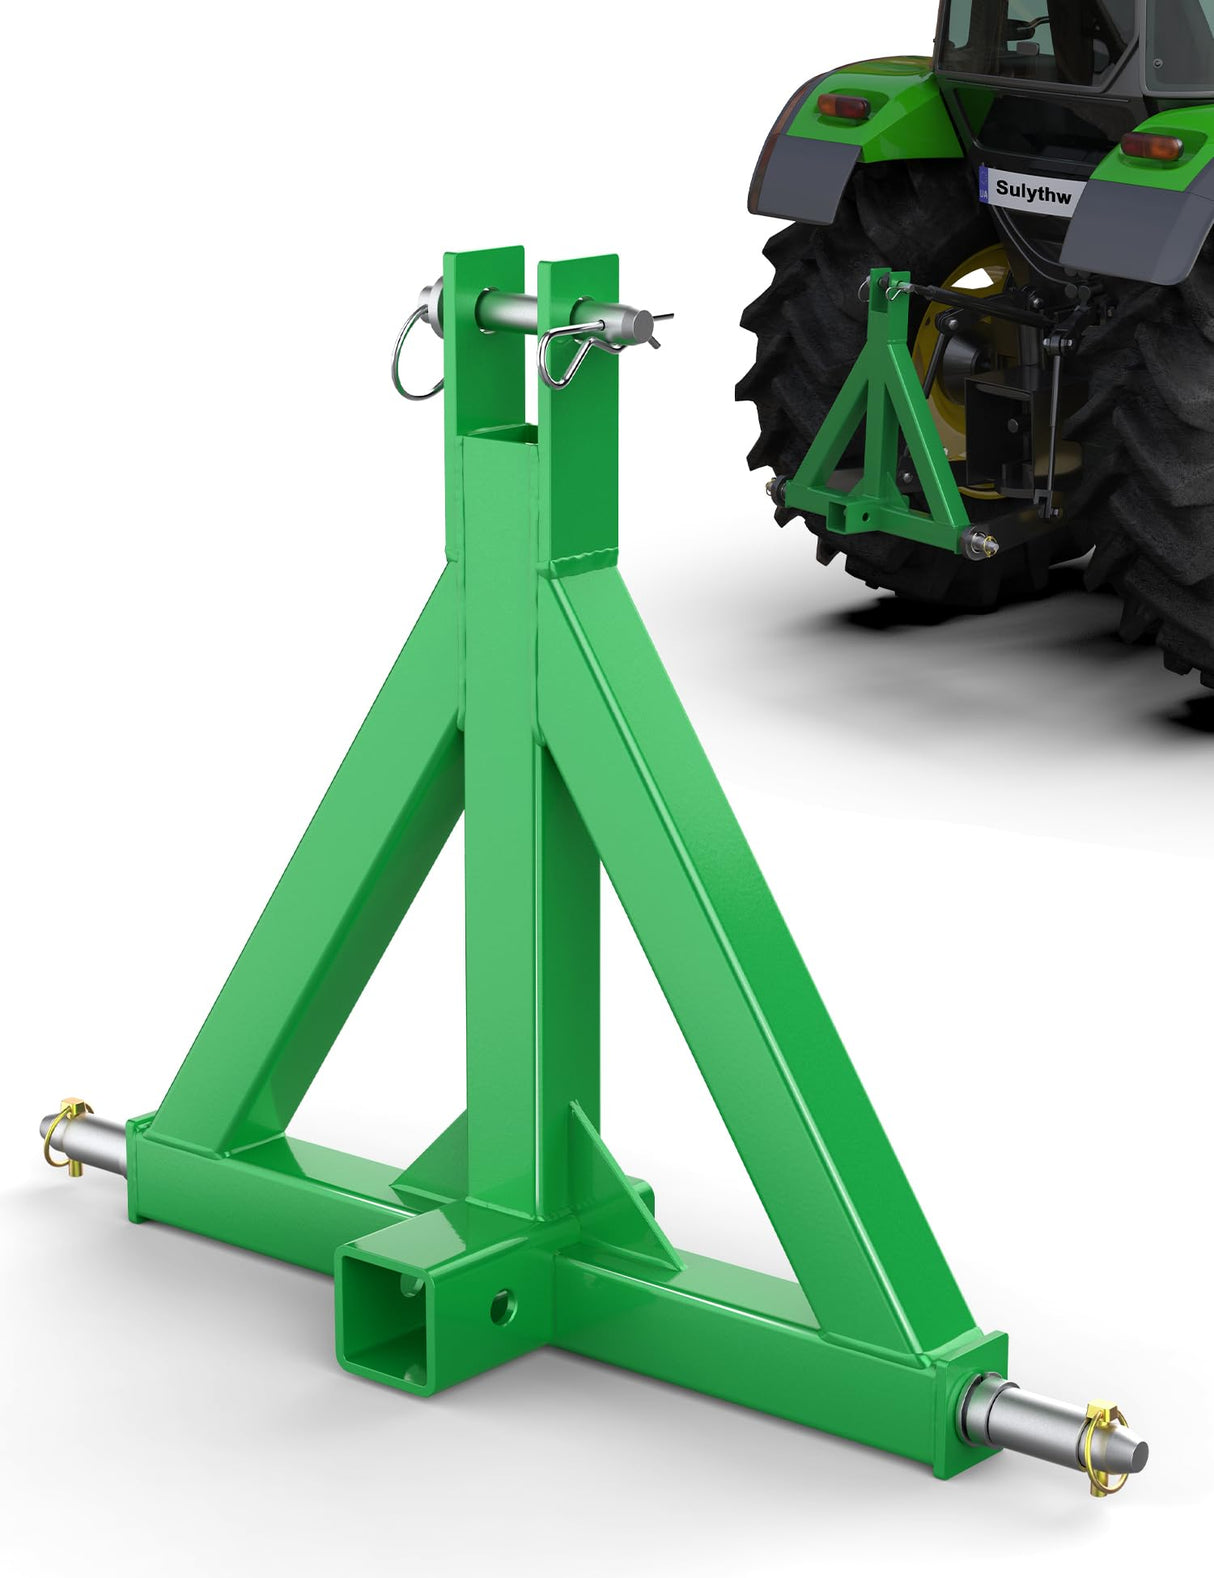 Durable Green 3 Point 2" Receiver Trailer Hitch Heavy Duty Drawbar Adapter Category 1 Tractor